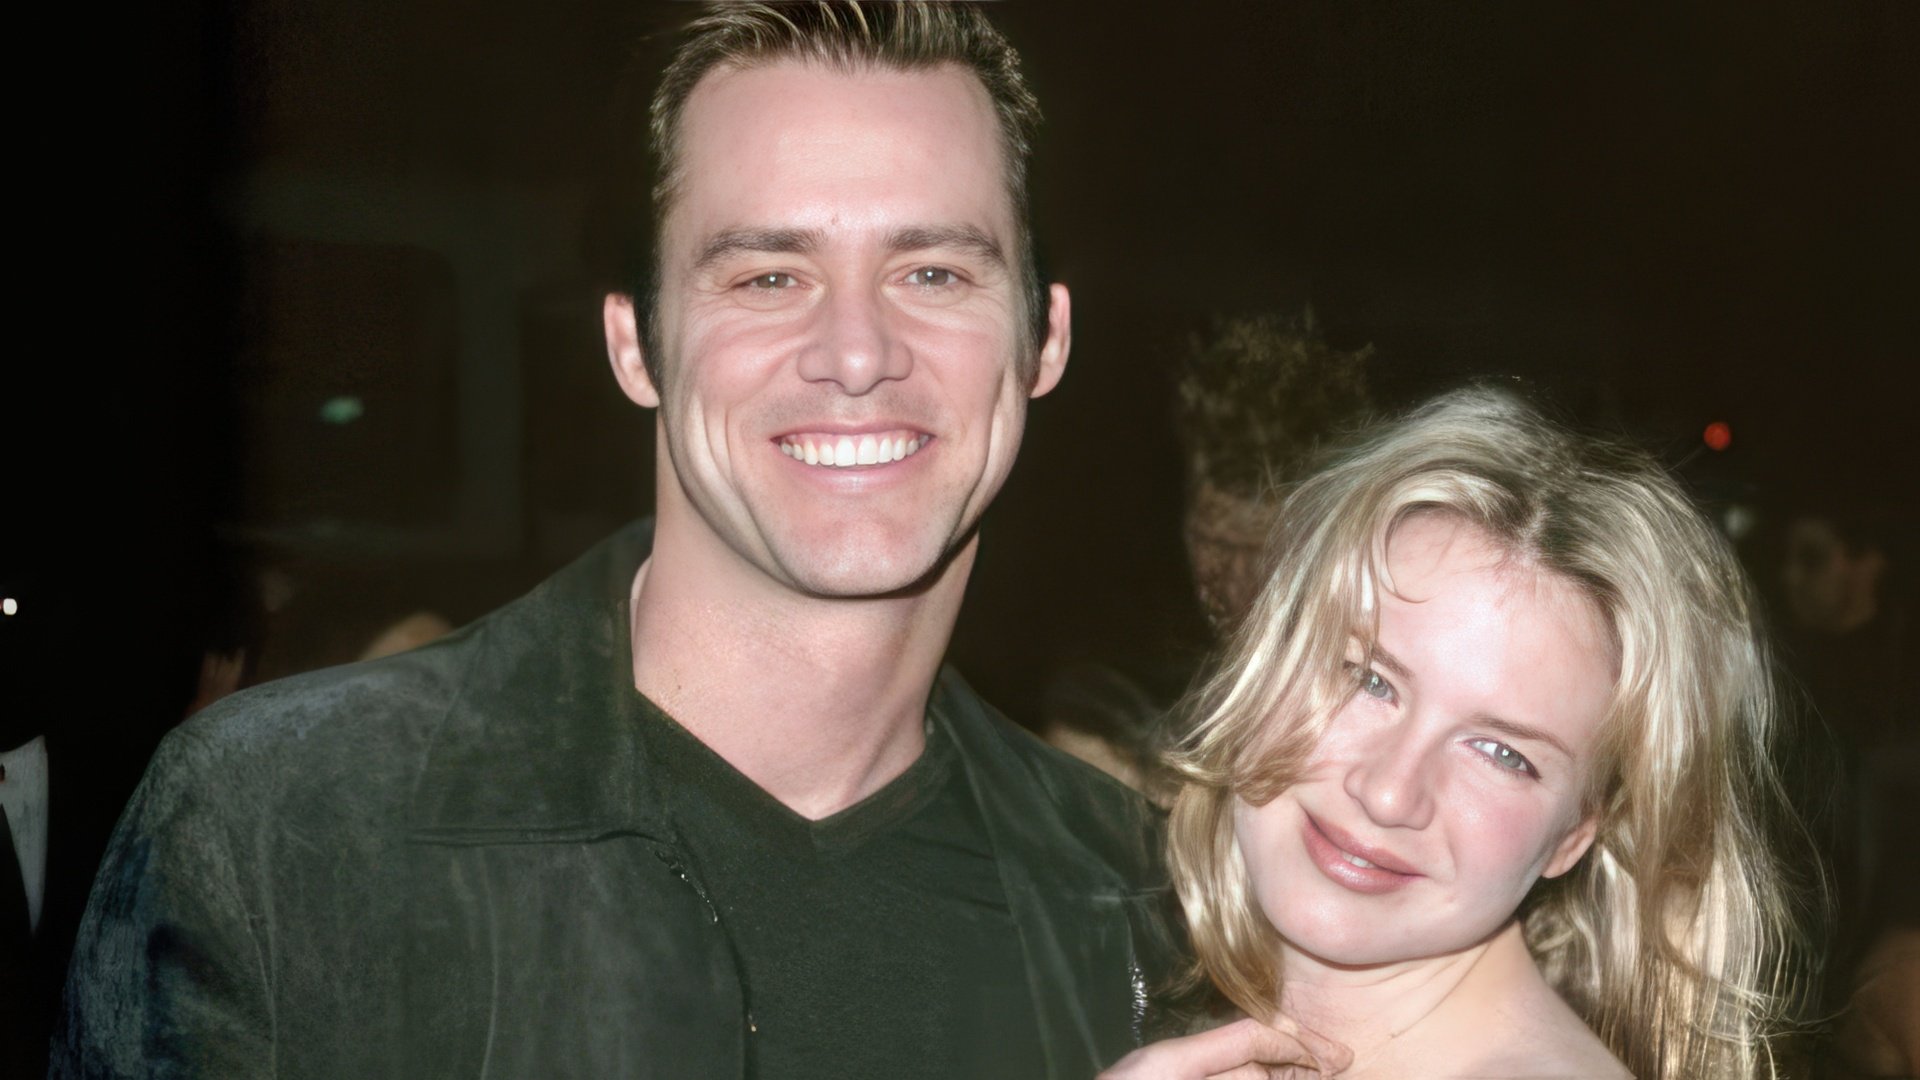 Jim Carrey and Renée Zellweger dated for a year